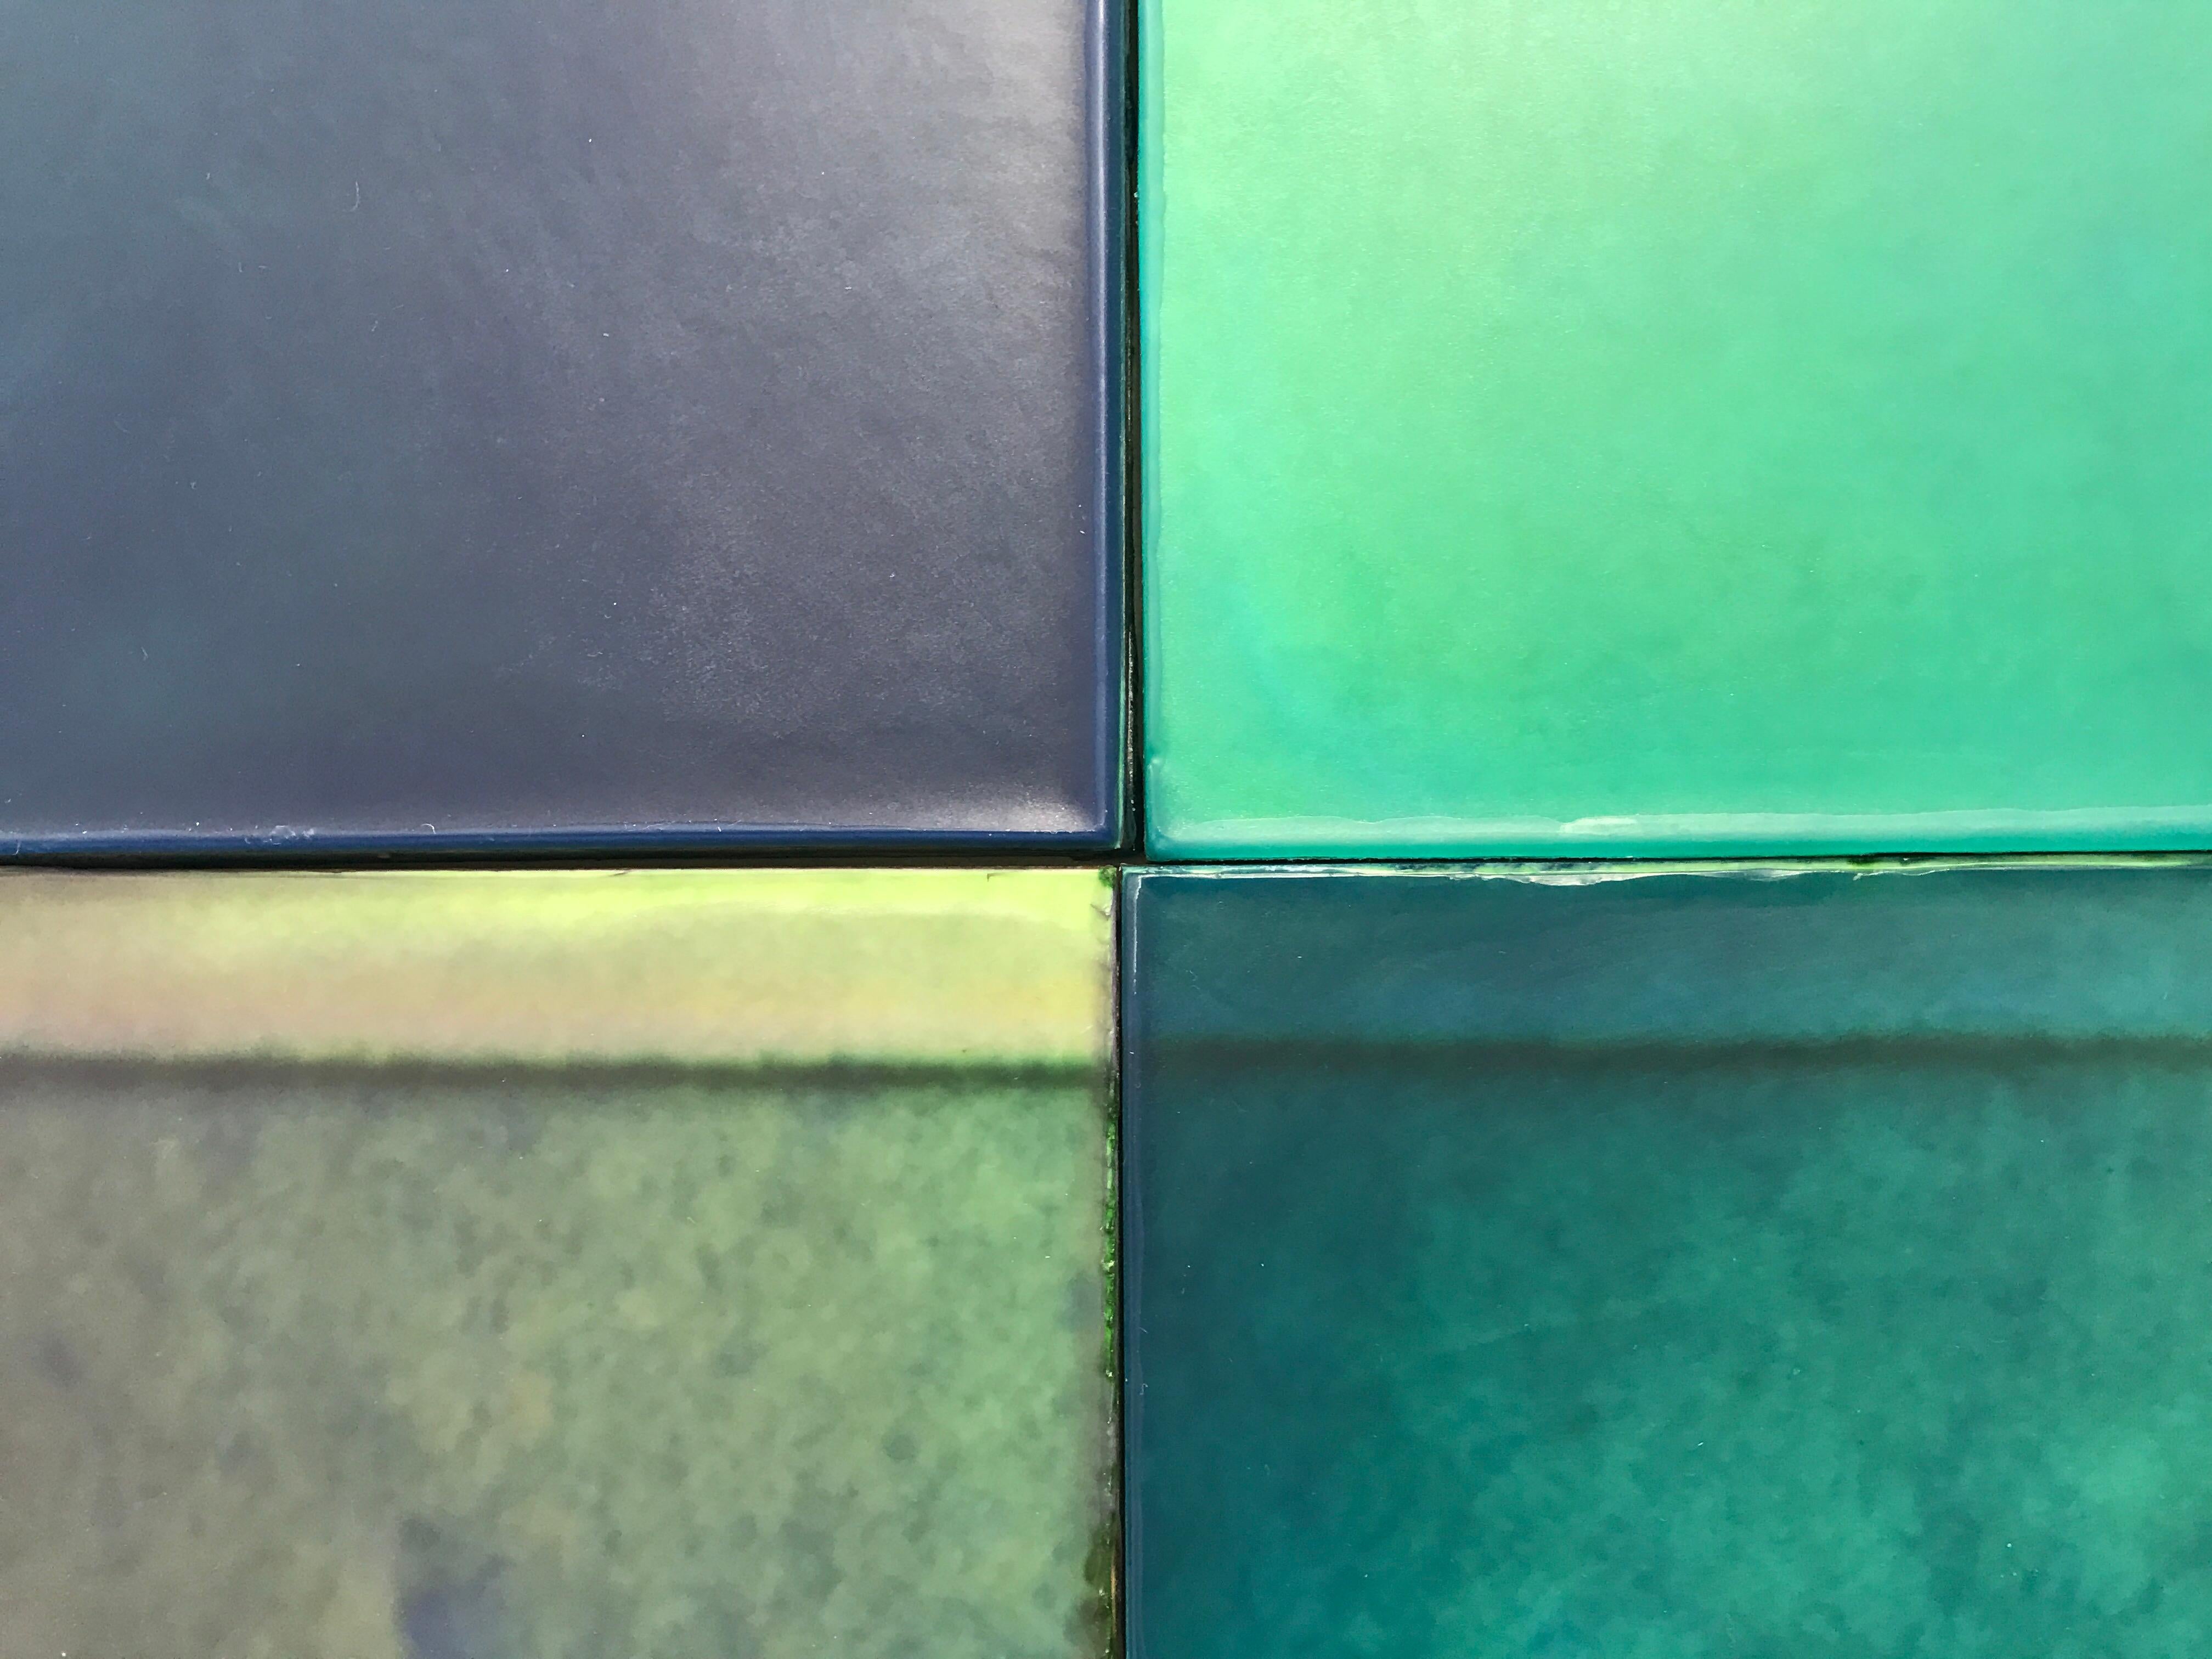 This wall piece is composed of 24 cast wax panels.  The abstracted image imbedded in the work is a photograph of the packing for Estee Lauder Modern Muse Perfume. Vivid emerald green and blue tones are created in Joanne Ungar's unique poured wax